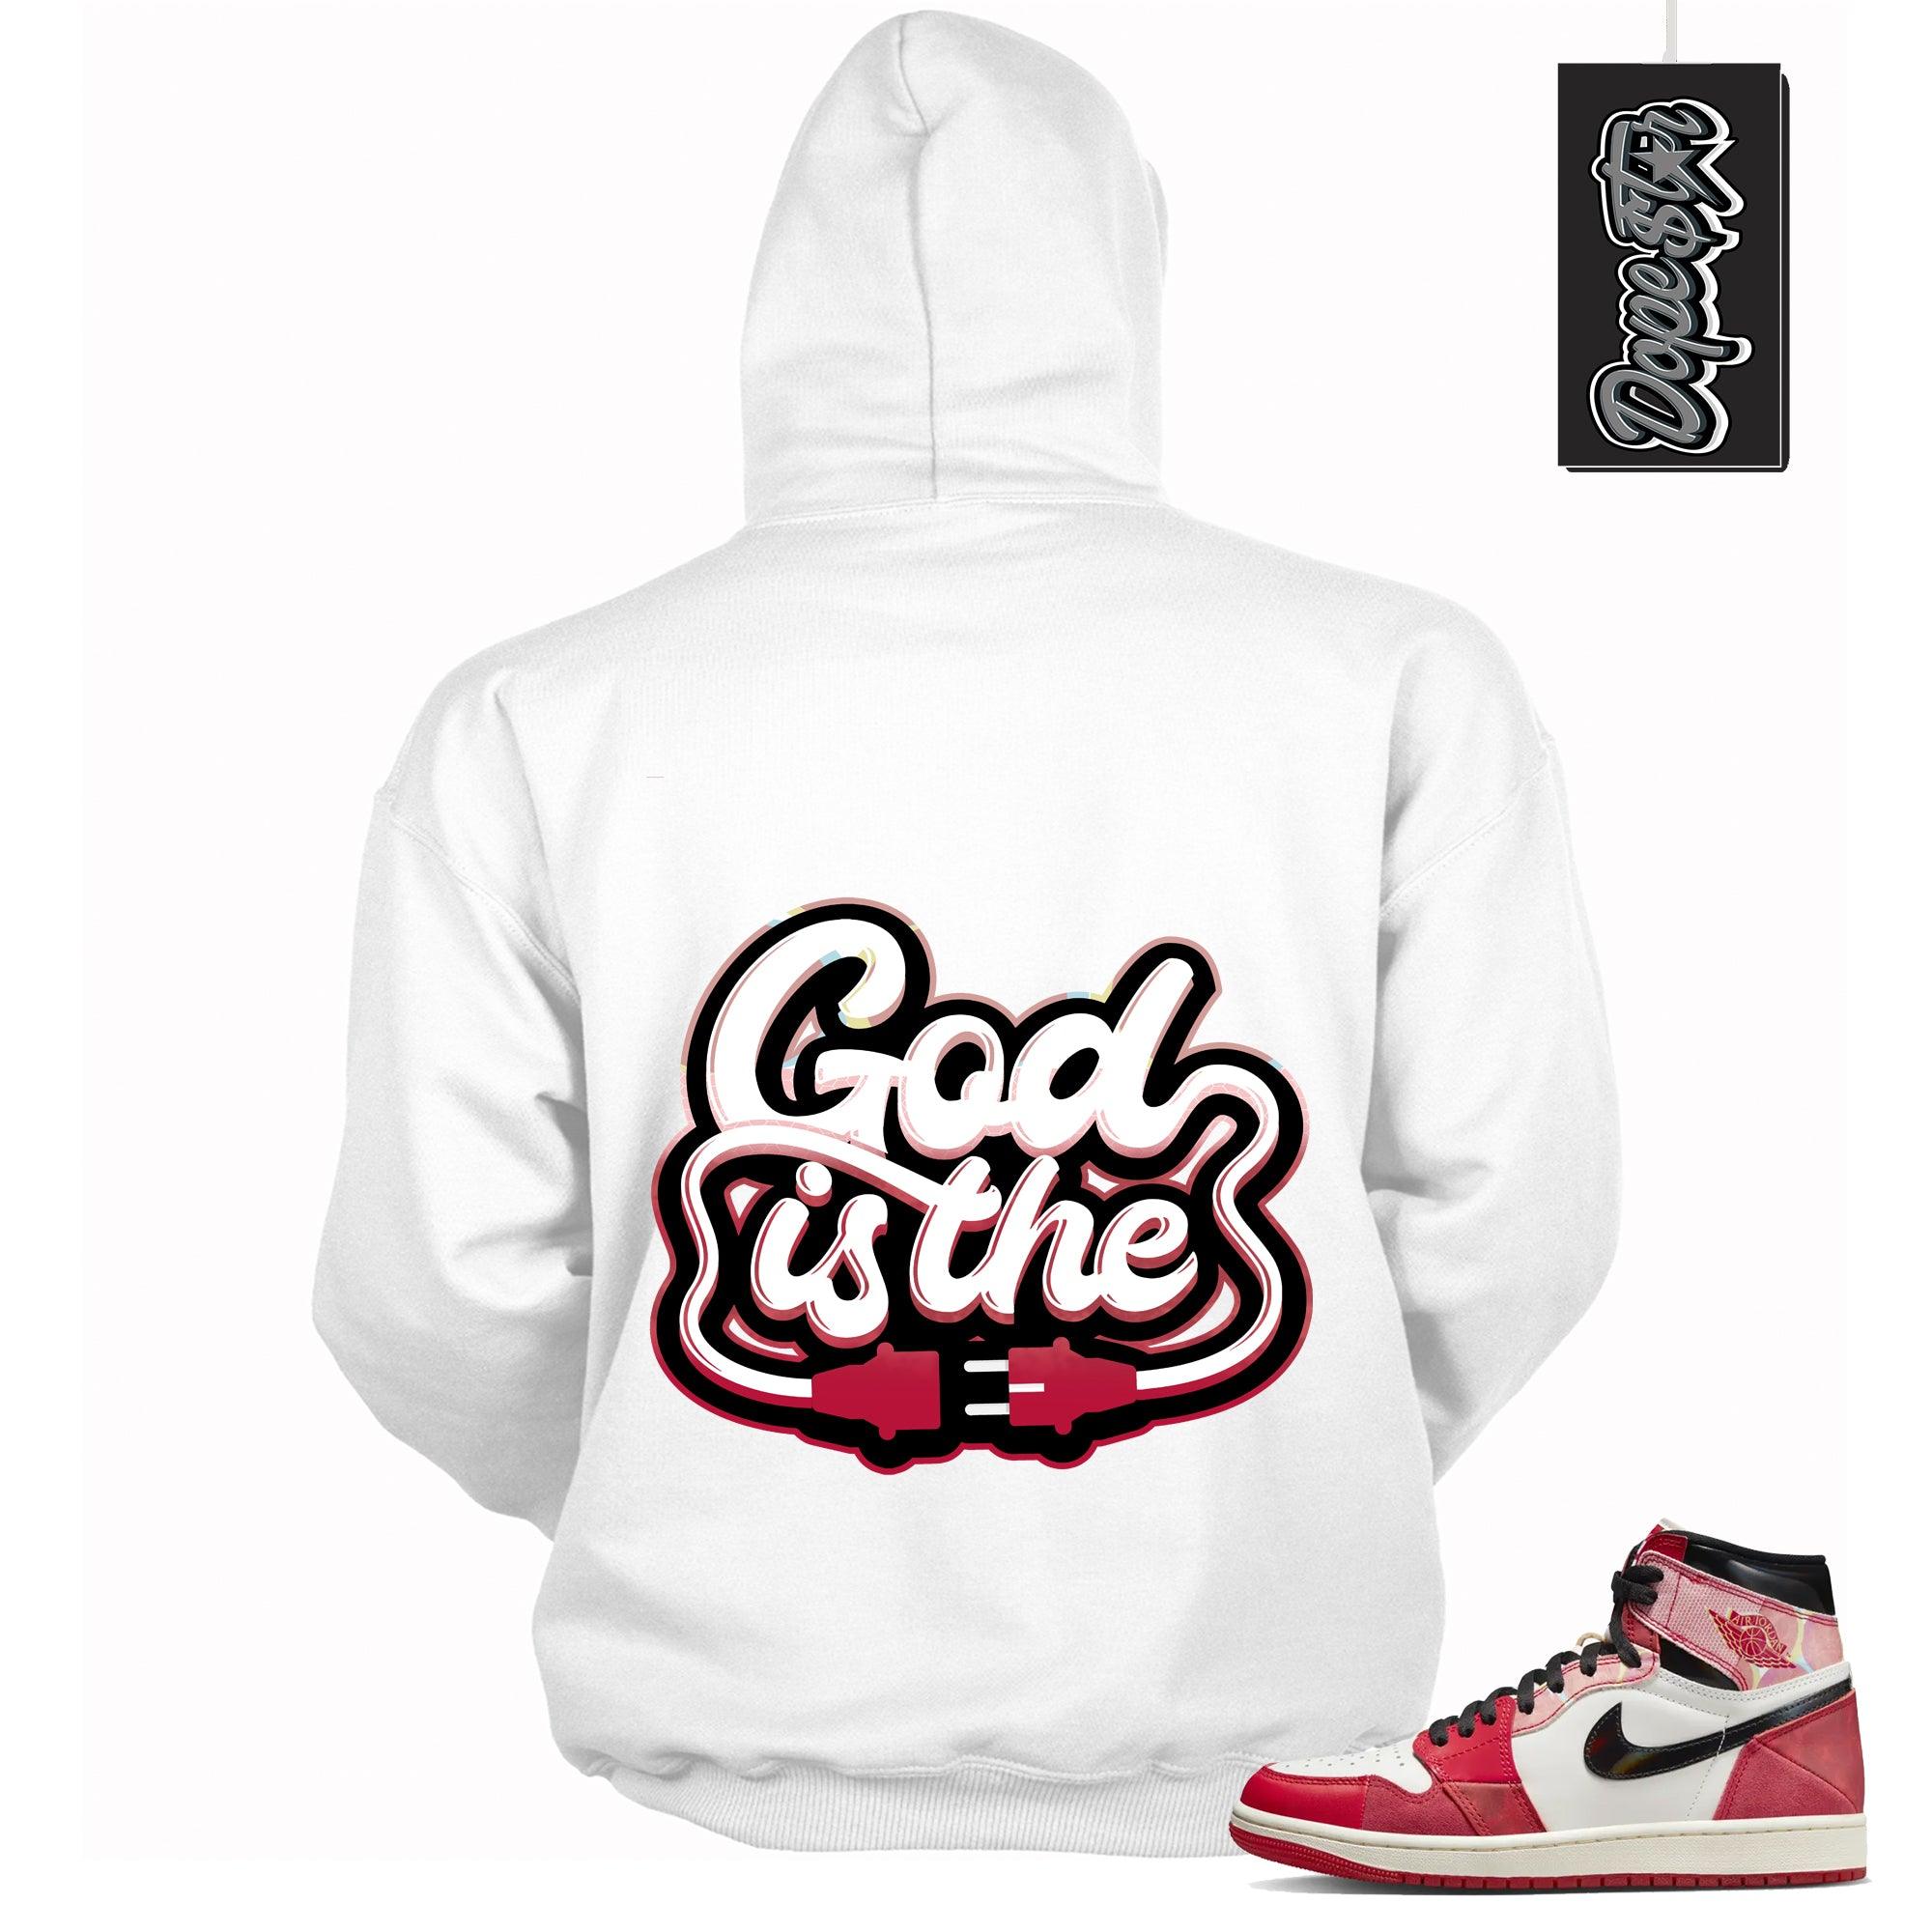 Cool White Graphic Hoodie with “ GOD IS THE “ print, that perfectly matches AIR JORDAN 1 Retro High OG NEXT CHAPTER SPIDER-VERSE sneakers